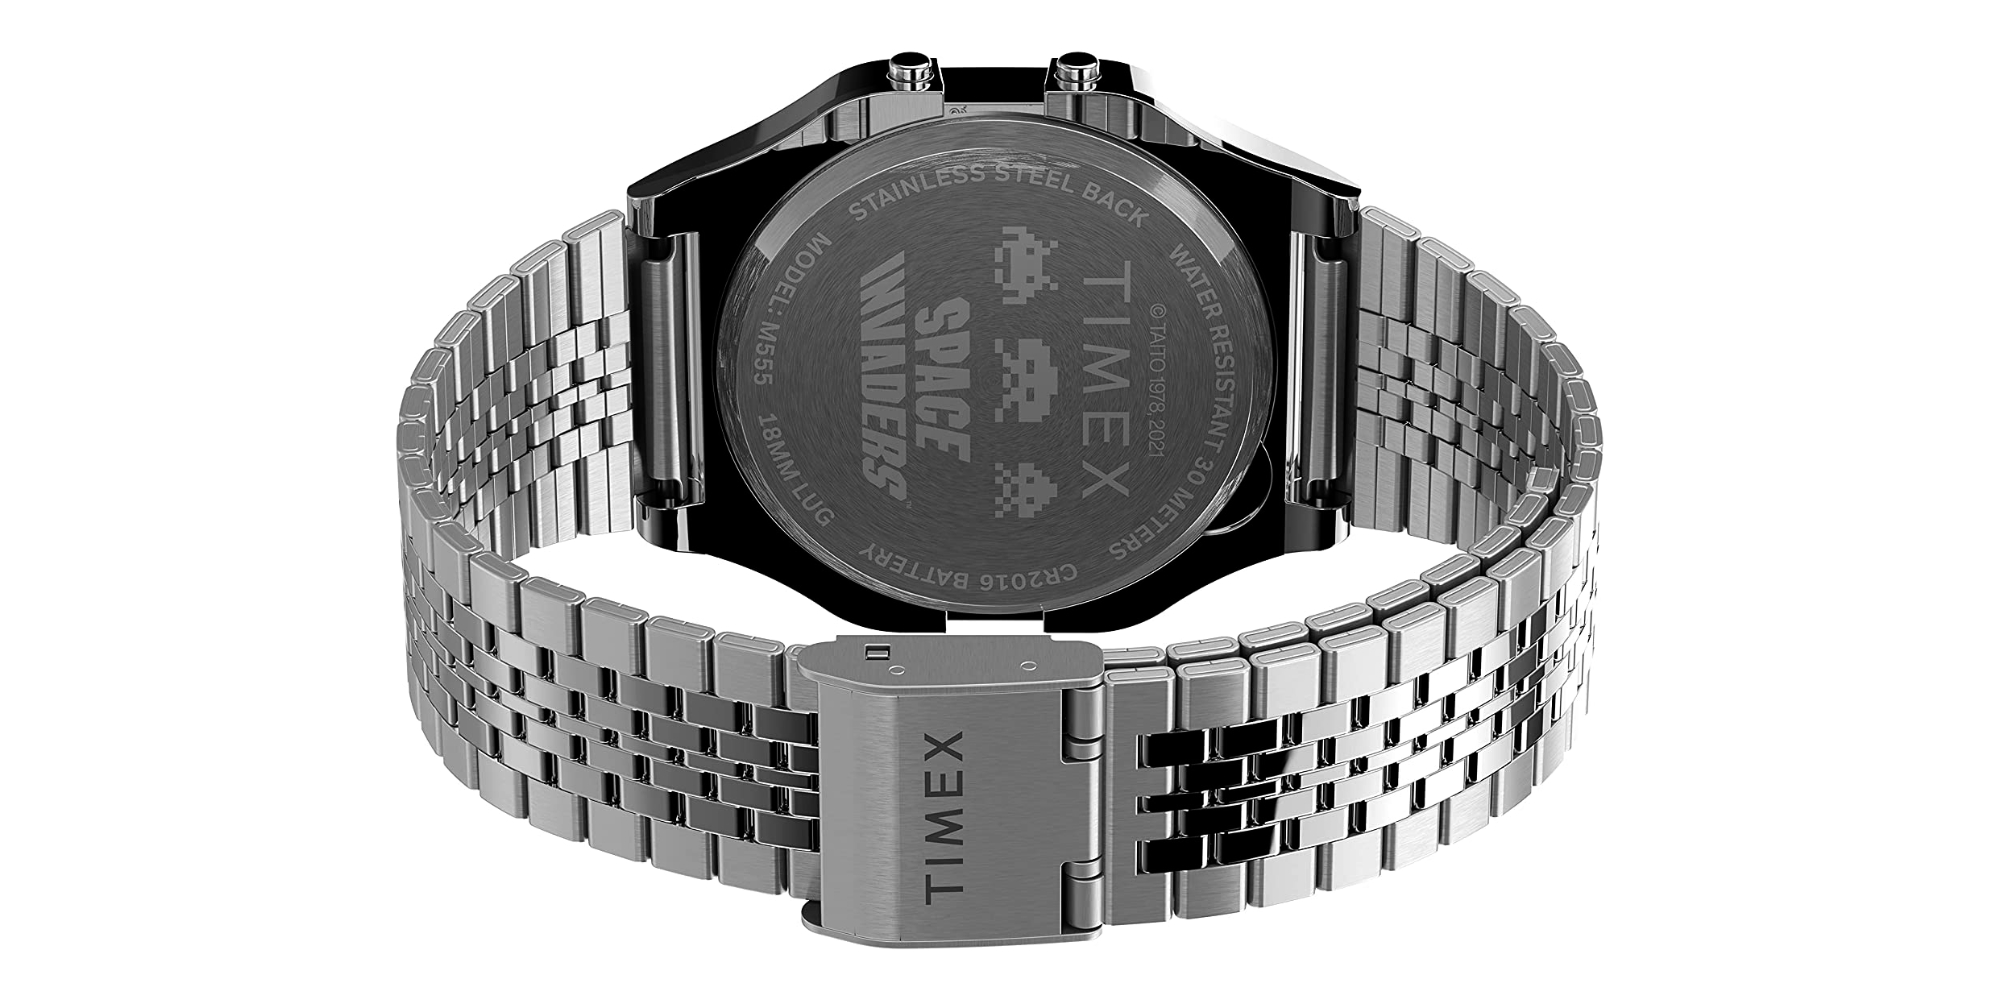 New Space Invaders watch brings pixelated aliens to your wrist 